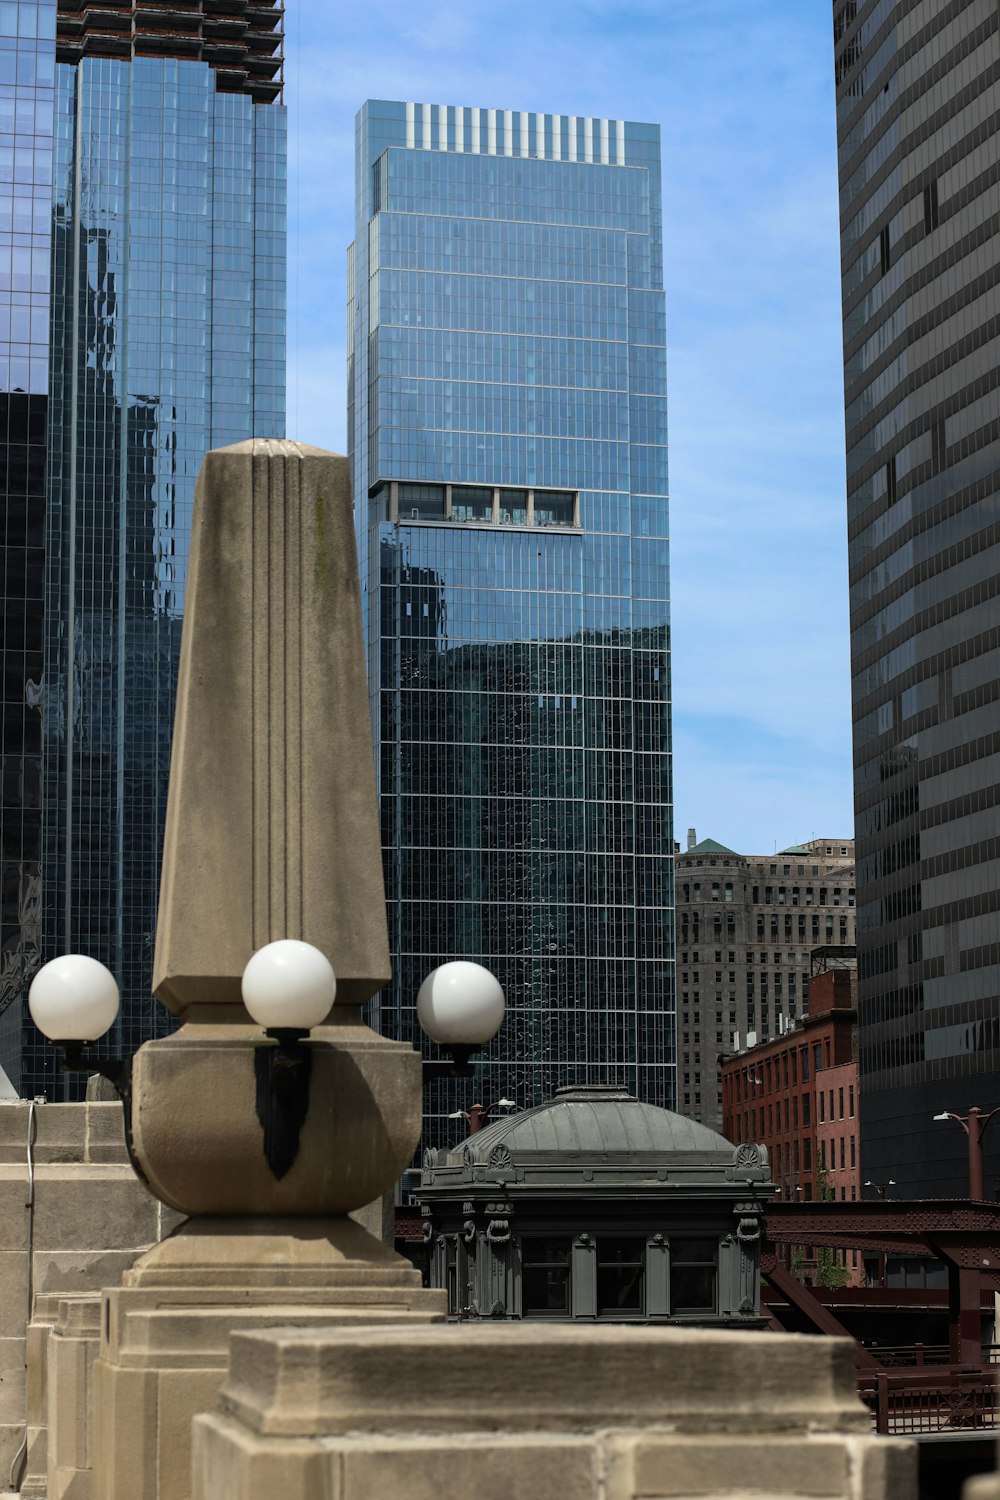 a statue in the middle of a city with skyscrapers in the background